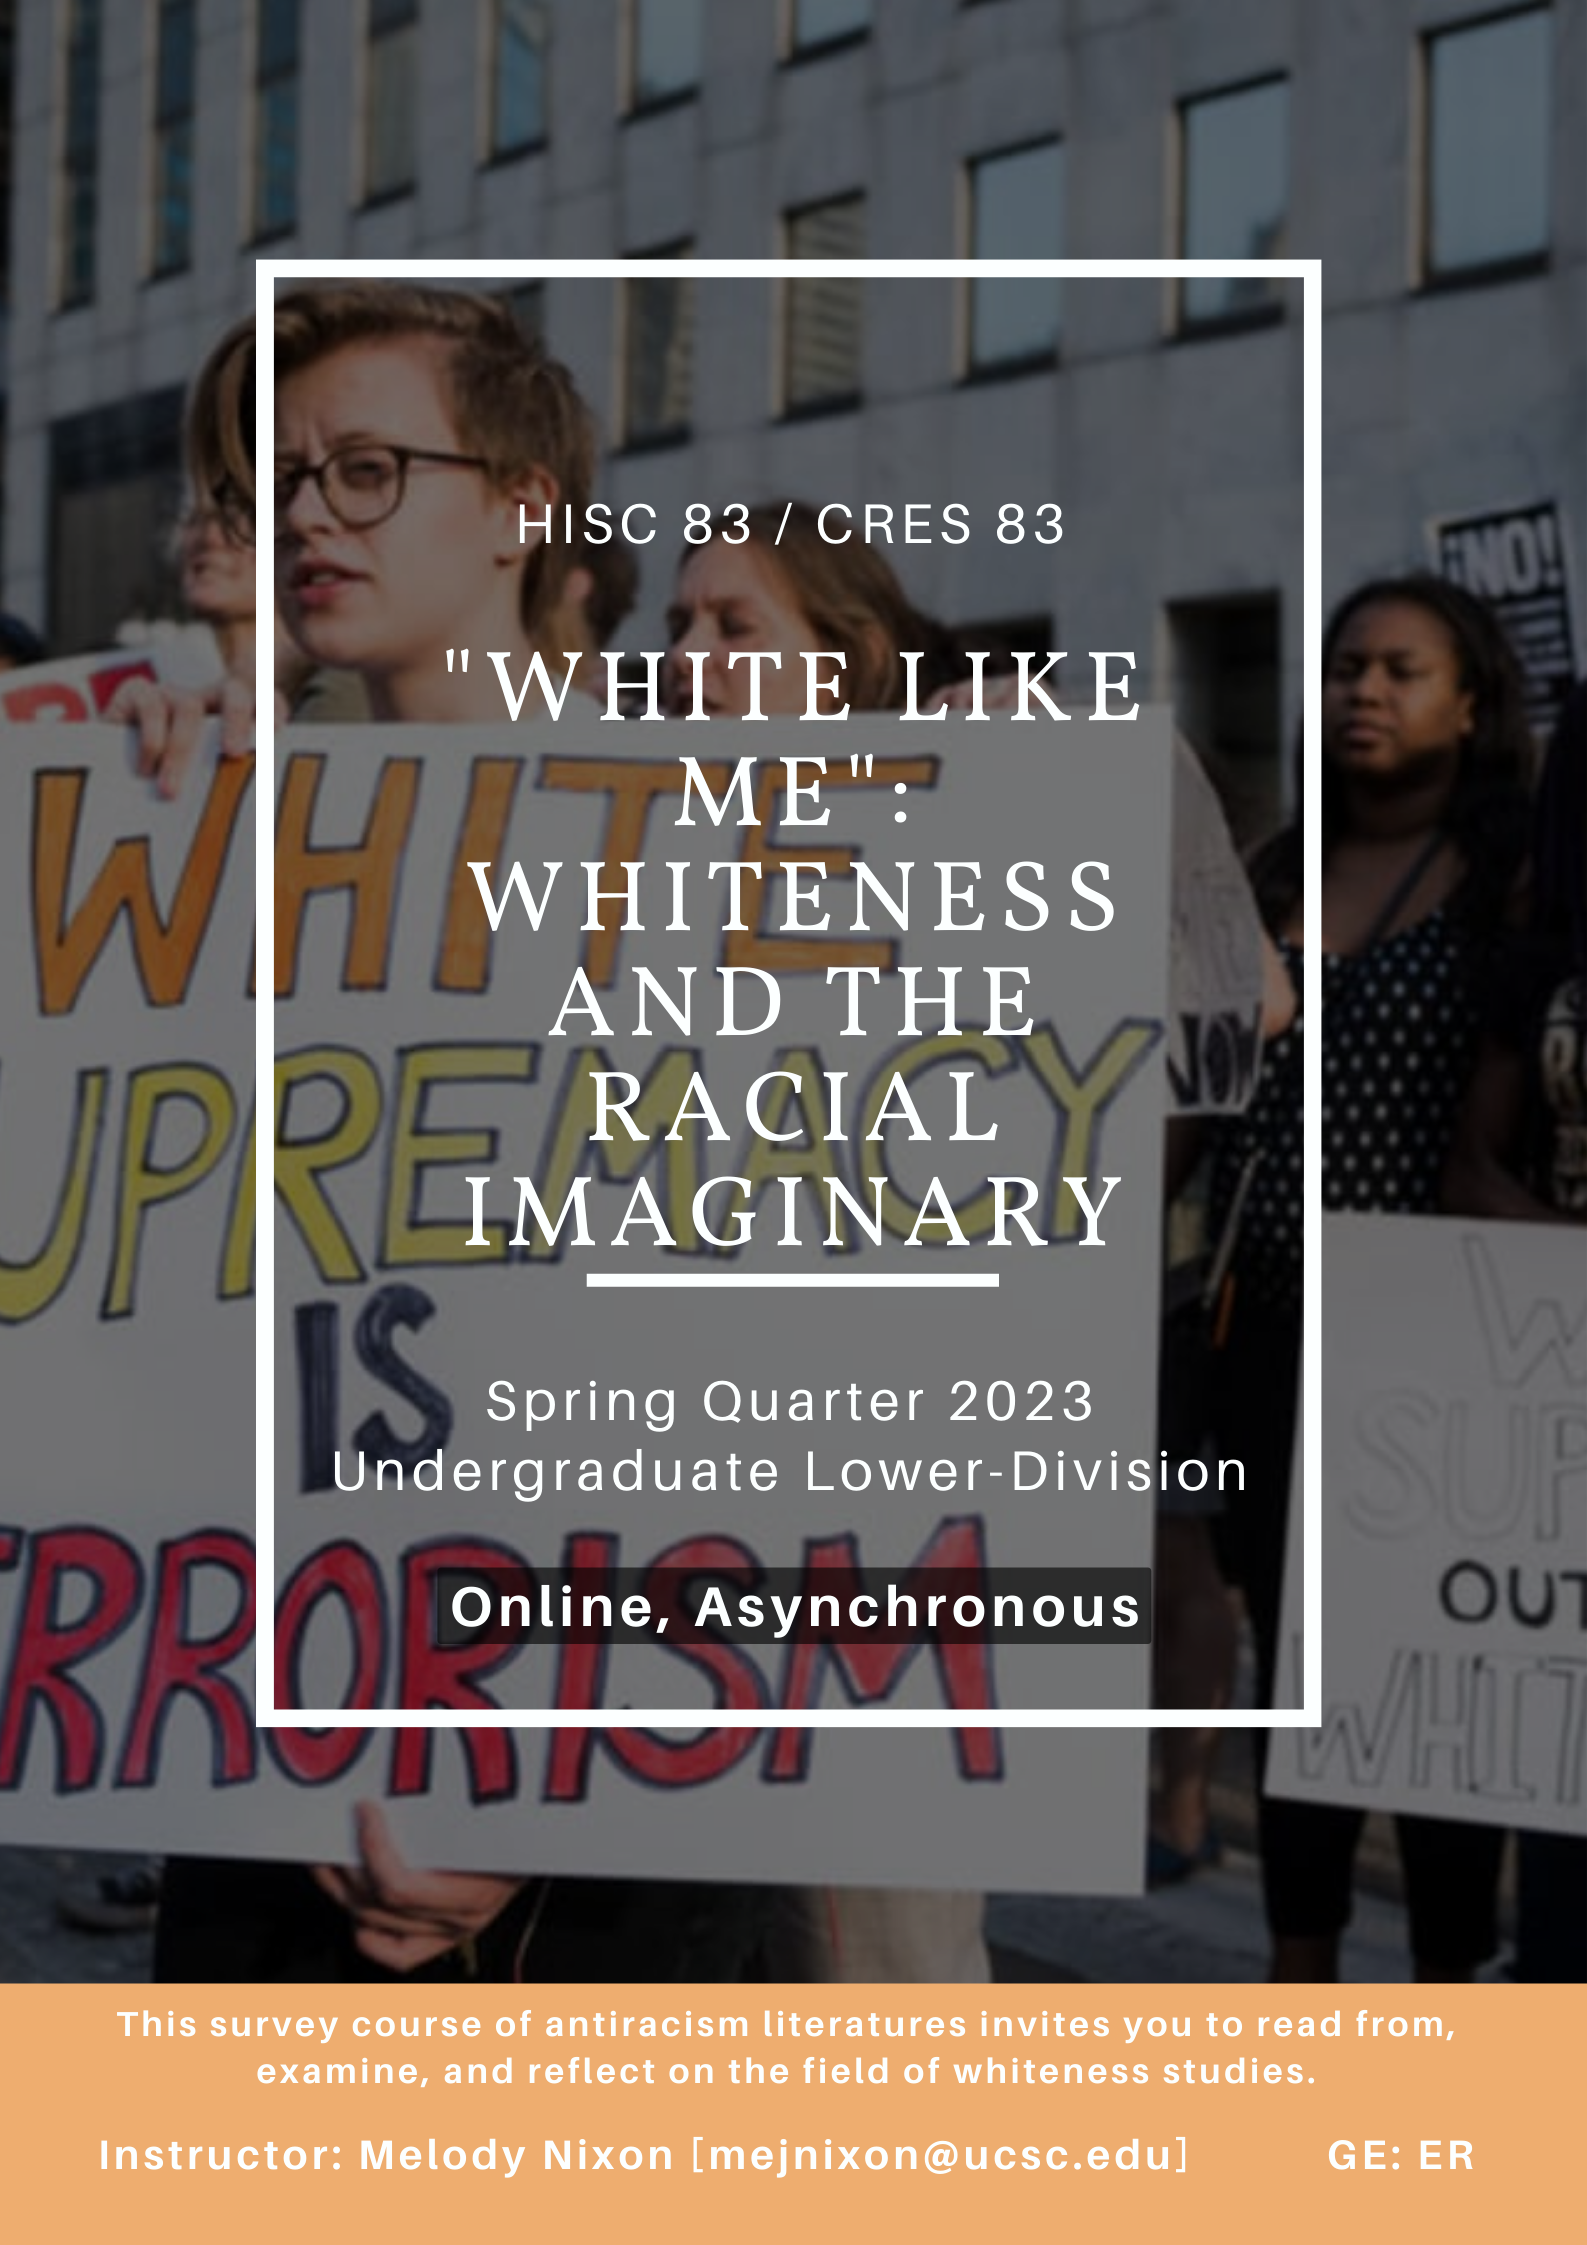 HISC 83 / CRES 83 Flyer: "White Like Me": Whiteness and the Racial Imaginary 